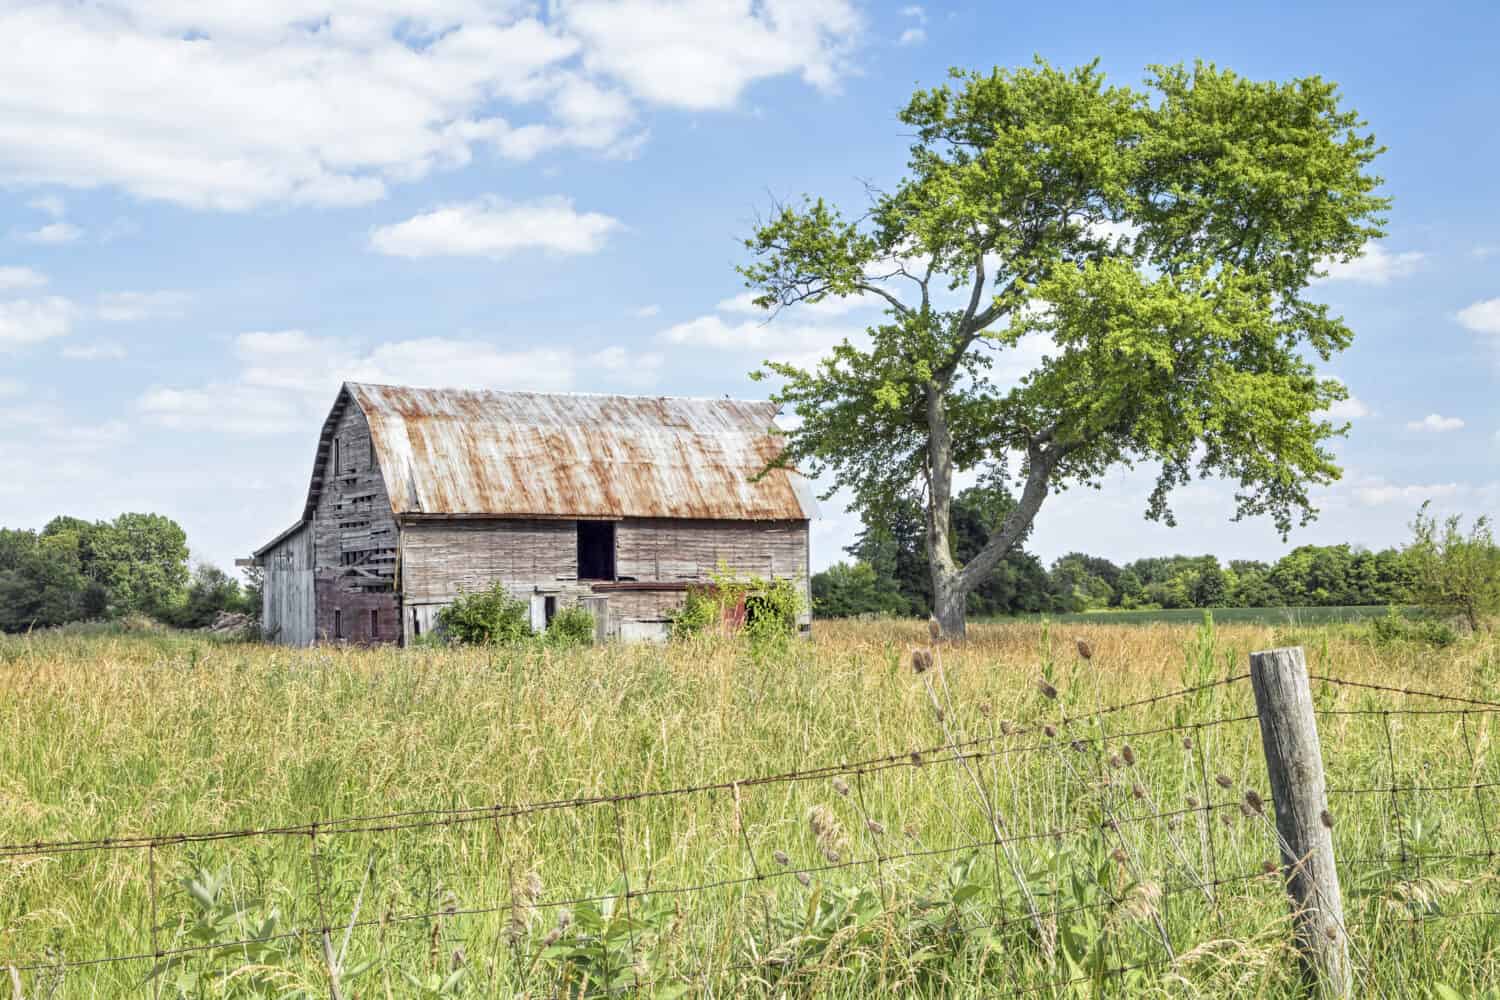 A rustic old barn stands by a weathered old tree in rural Madison County, Ohio.